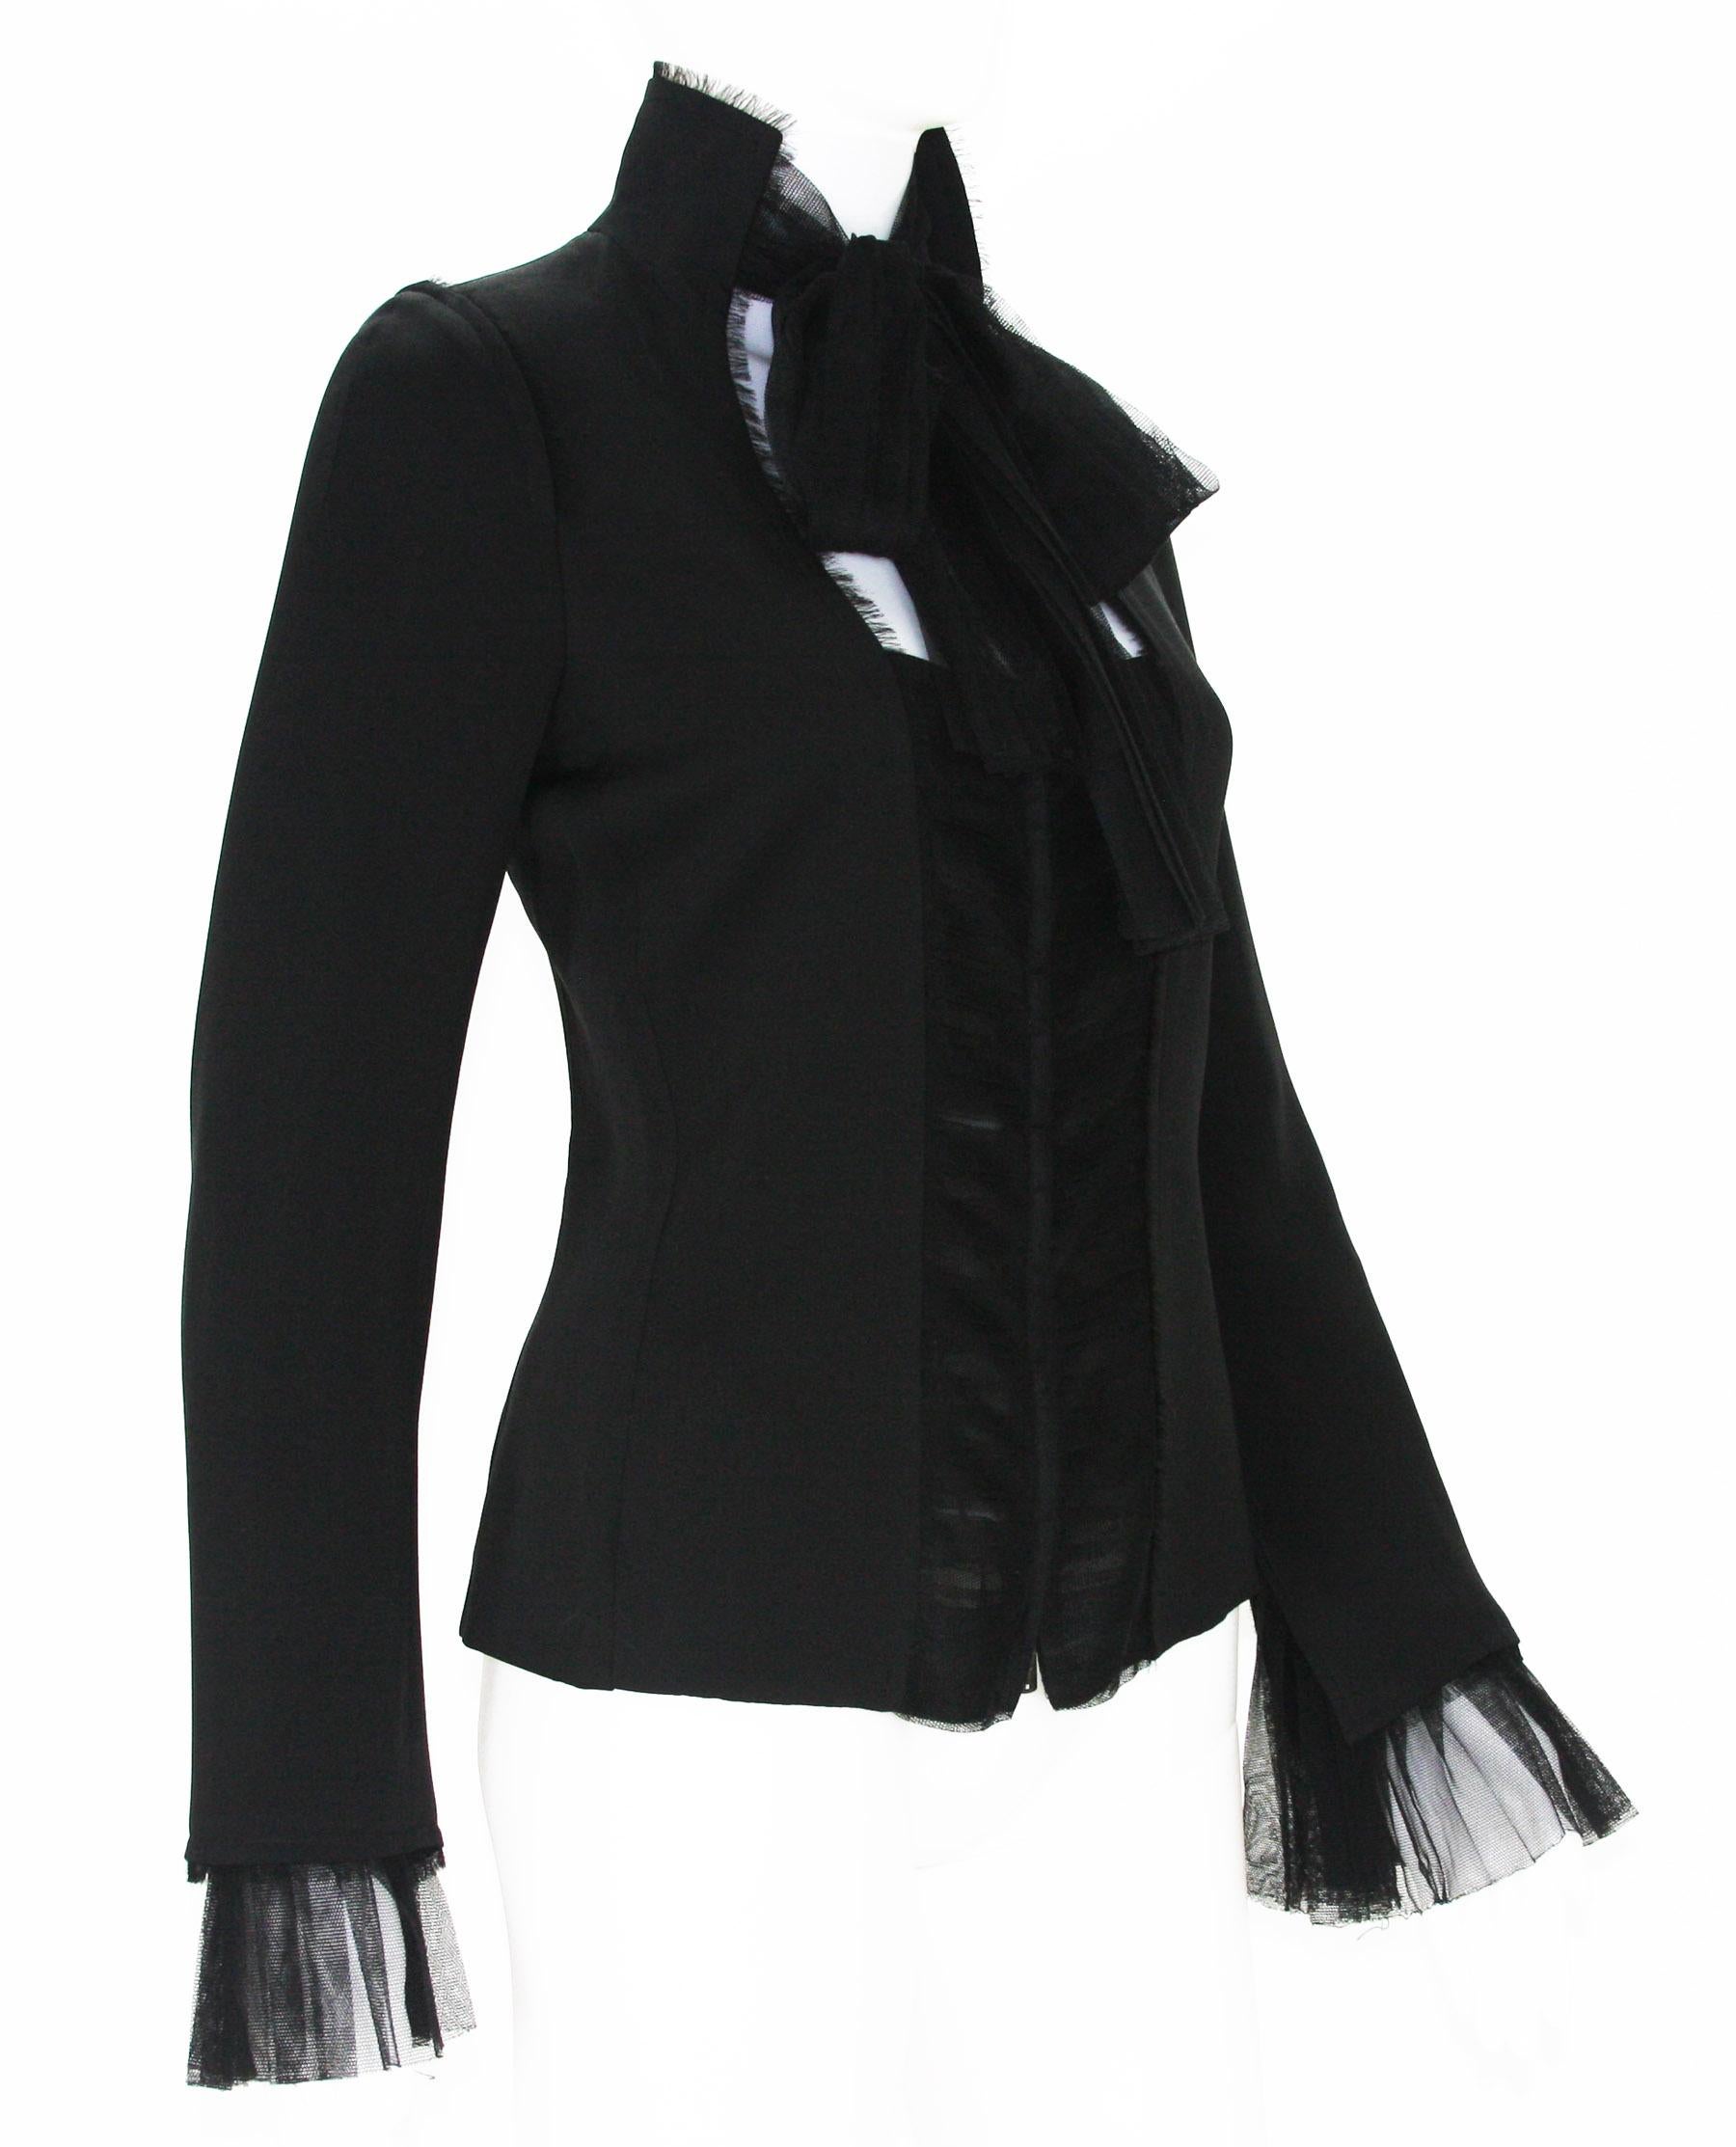 Tom Ford for Yves Saint Laurent Black Silk Plisse Tulle Jacket Blazer
F/W 2002 Collection
Designer sizes available - Fr. 36 and 38 ( US 4 and 6)
Classy and Romantic - Very French!!!
100% Silk, Plisse Tulle Inserts on the Front and Sleeves, Front Zip